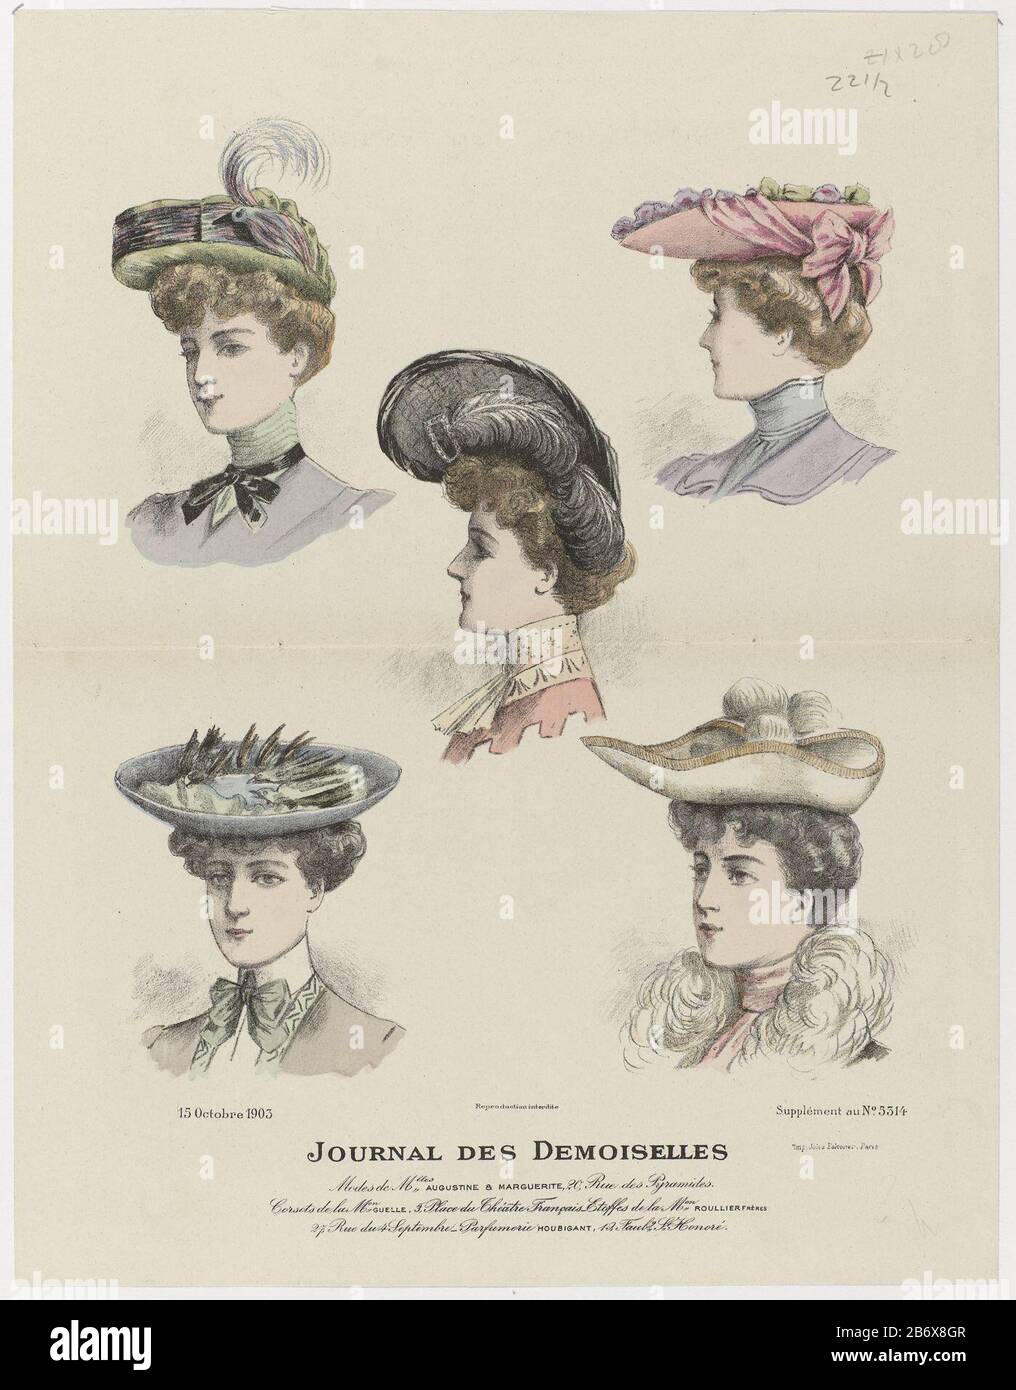 Five hats adorned with feathers, ostrich feathers, bird cups and bow.  According to the caption: 'modes' of Augustine & Marguerite. Corsets Guelle  firm. Substances of the Roullier Frères firm. Houbigant perfumery. Print